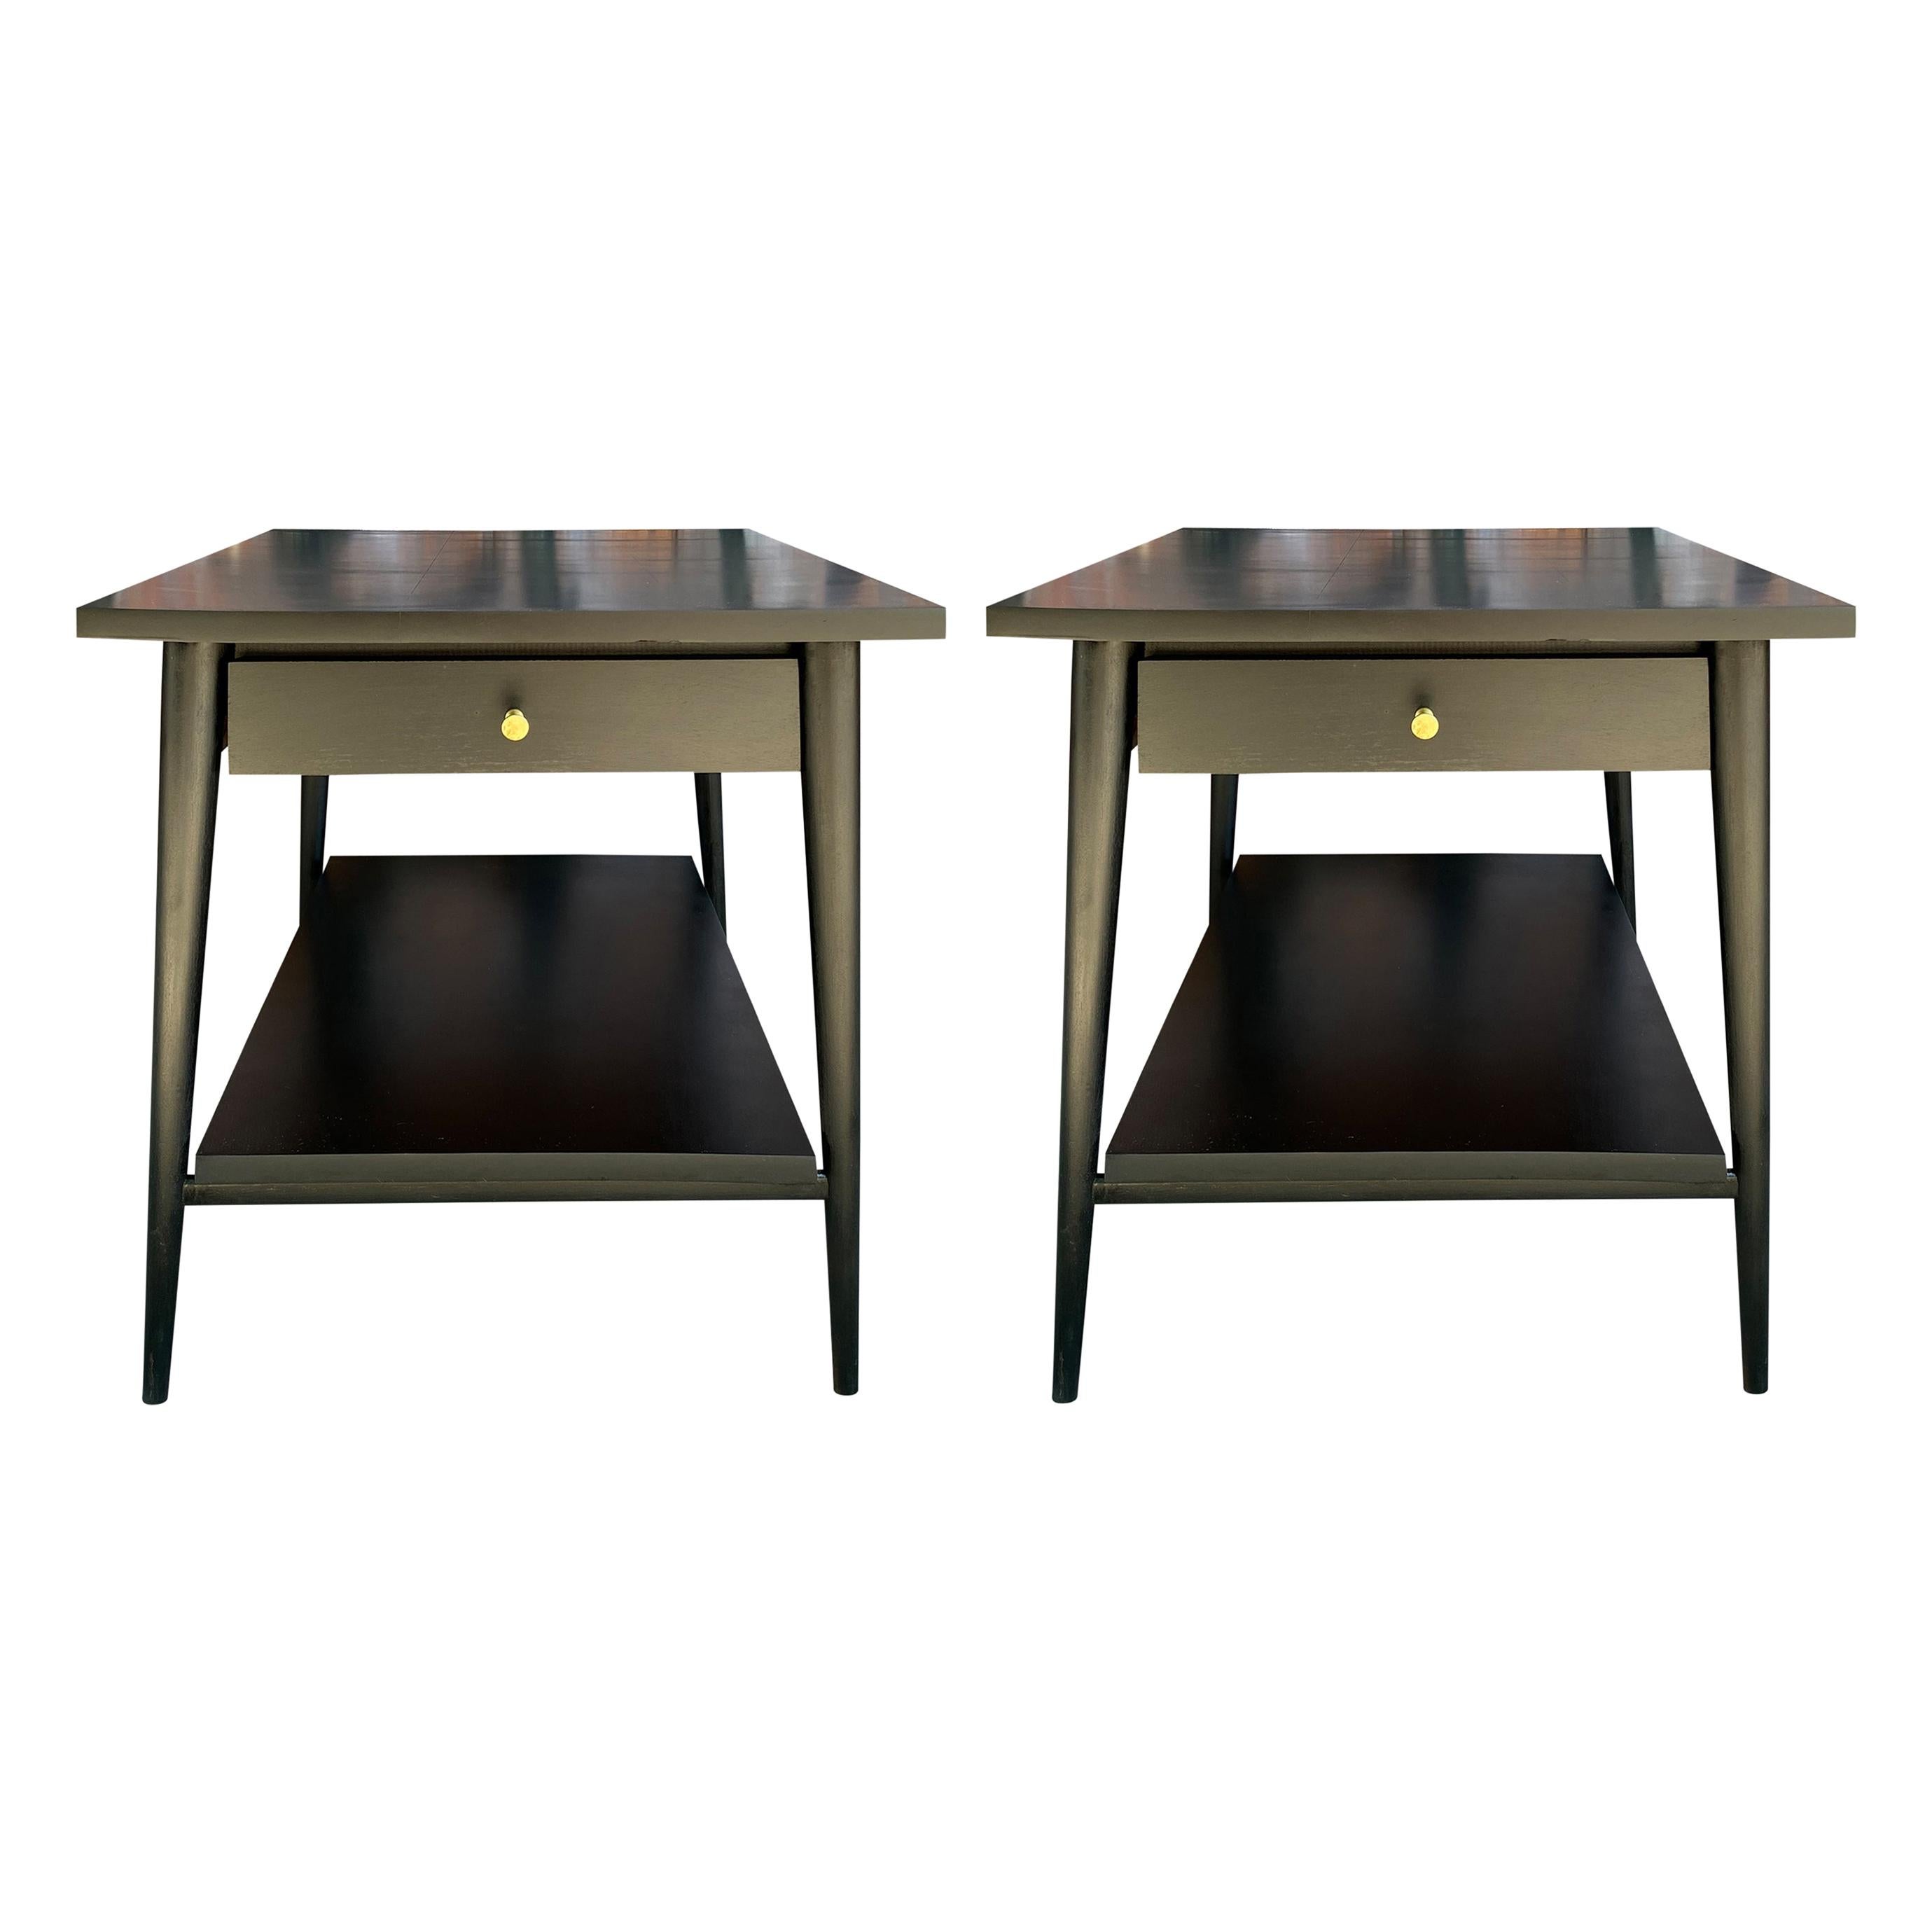 Midcentury Paul McCobb #1587 Nightstands Black Lacquer Brass Knobs End Tables